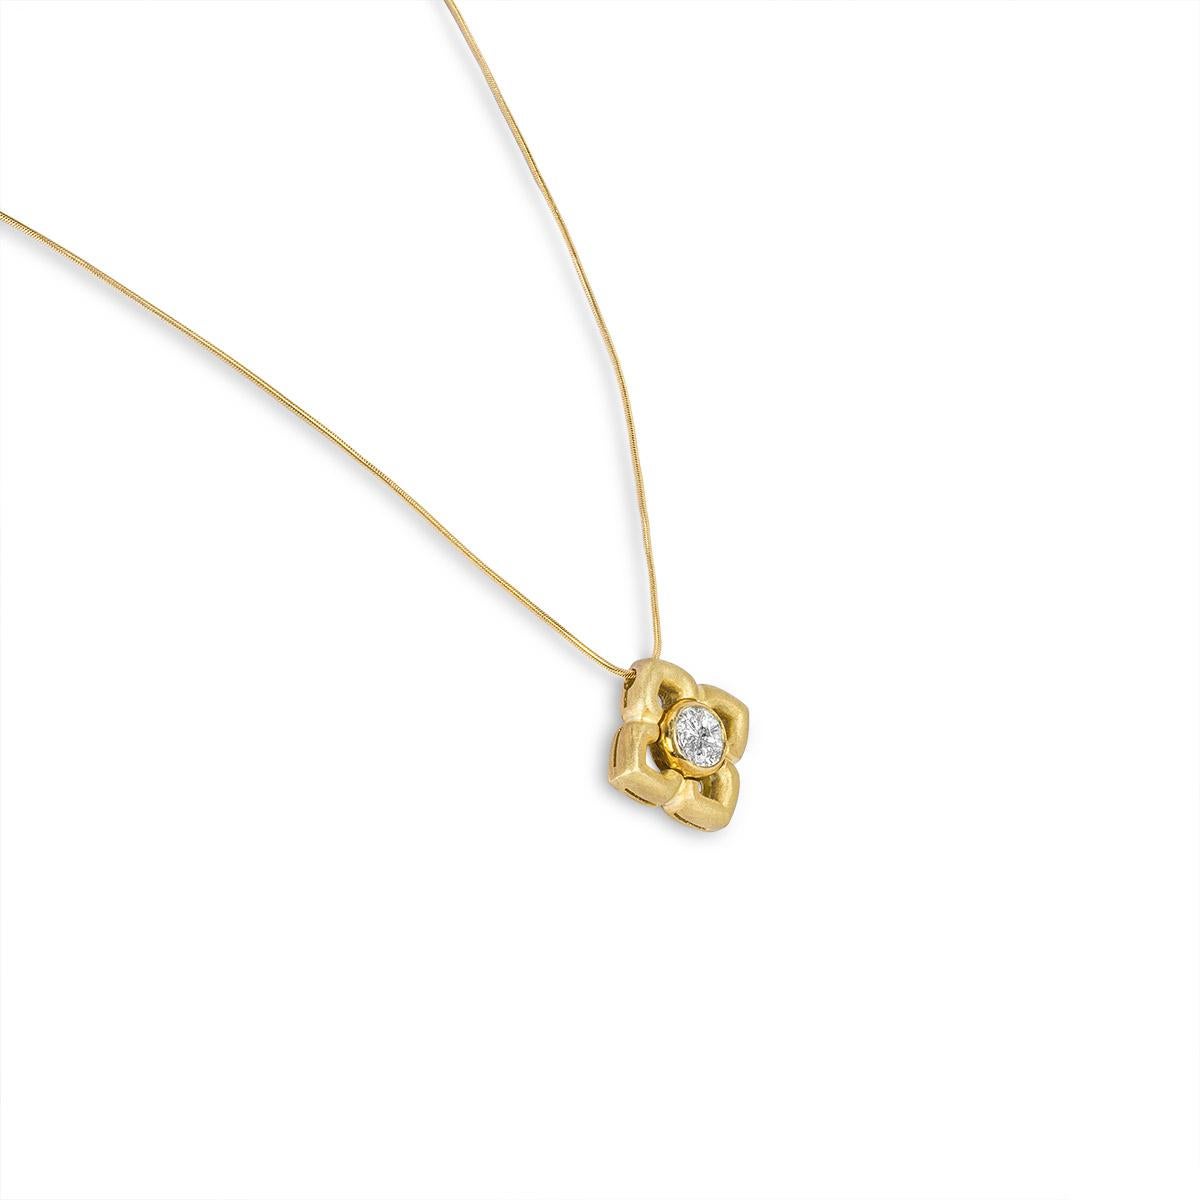 A unique 18k yellow gold diamond pendant. The pendant features a brushed gold floral design set to the centre with a cluster of diamonds in the shape of a circle. The 4 shield shaped diamonds have an approximate total weight of 1.00ct, G-H colour